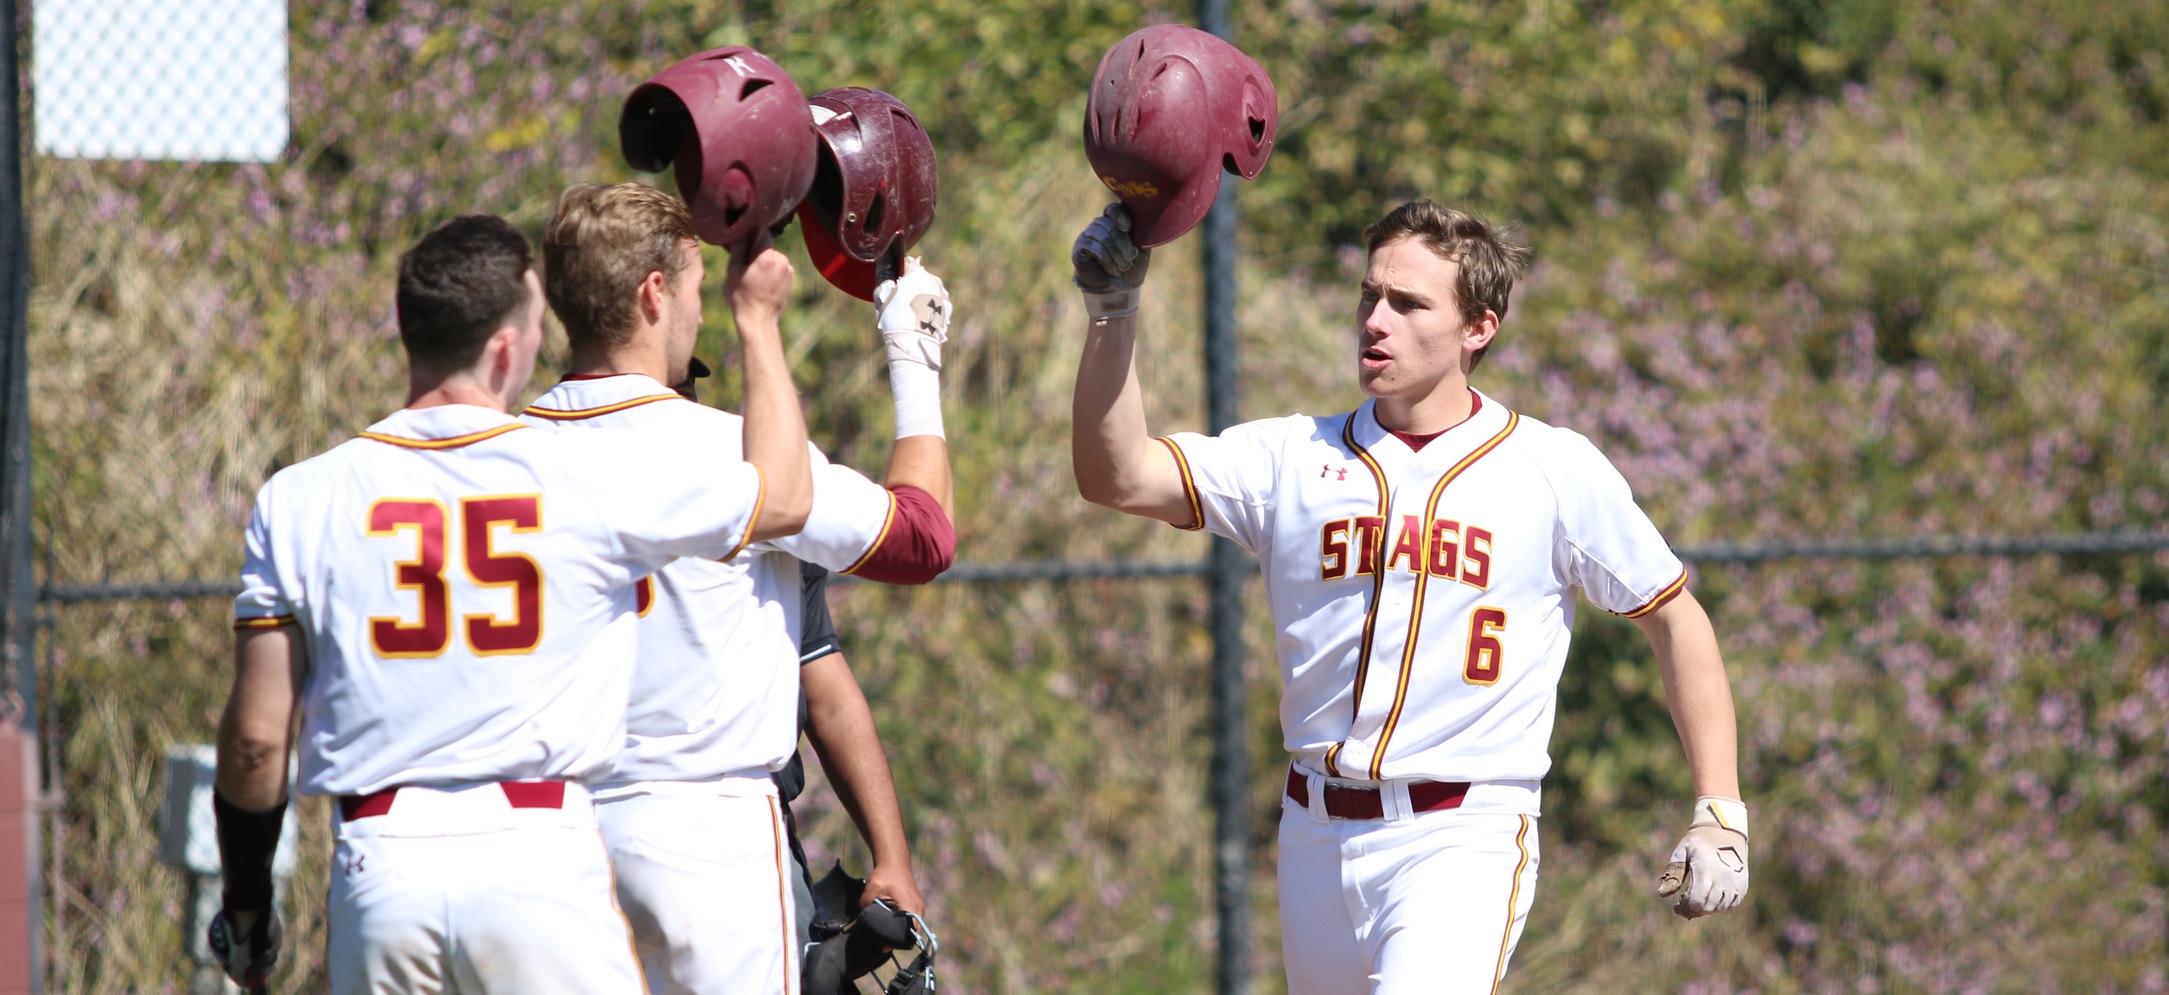 CJ Novogradac (CMC) hit the first of three home runs for the Stags in Game One. (photo credit: Alisha Alexander)